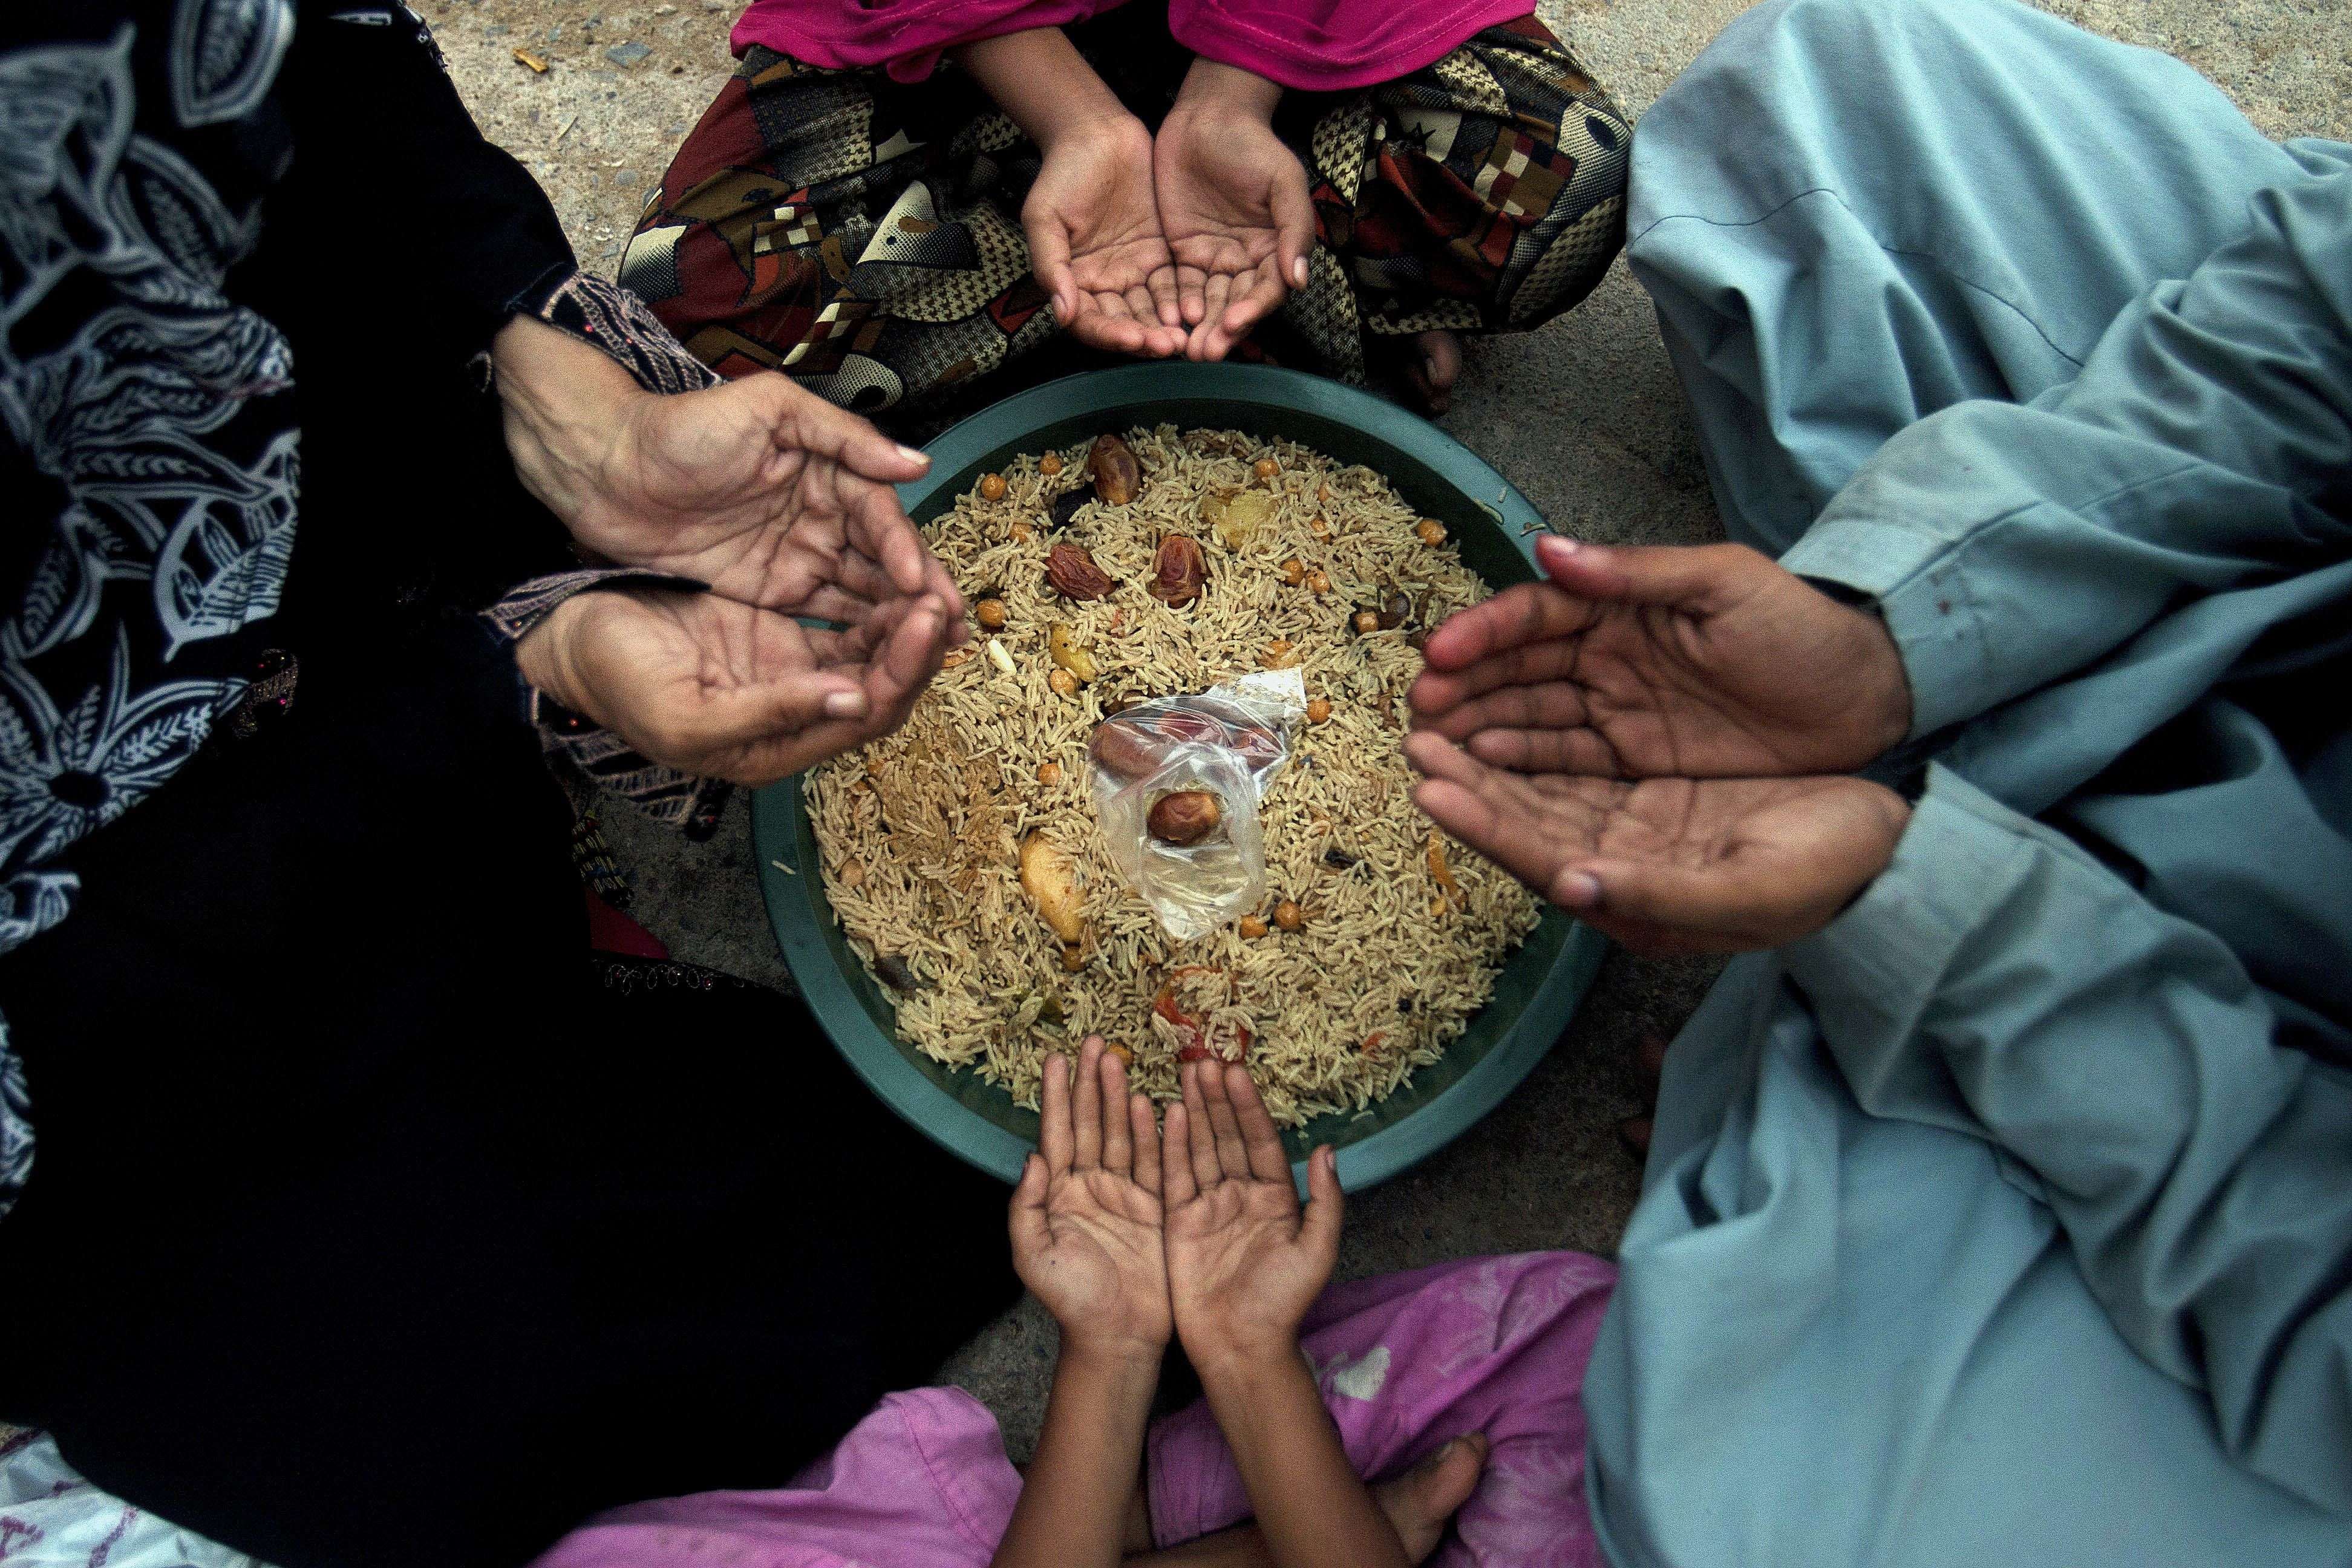 A family pray before breaking their fast during the Islamic month of Ramadan at a free food distribution point in Karachi, Pakistan, Wednesday, June 8, 2016. Muslims across the world are observing the holy fasting month of Ramadan, when they refrain from eating, drinking and smoking from dawn to dusk. (AP Photo/Shakil Adil)